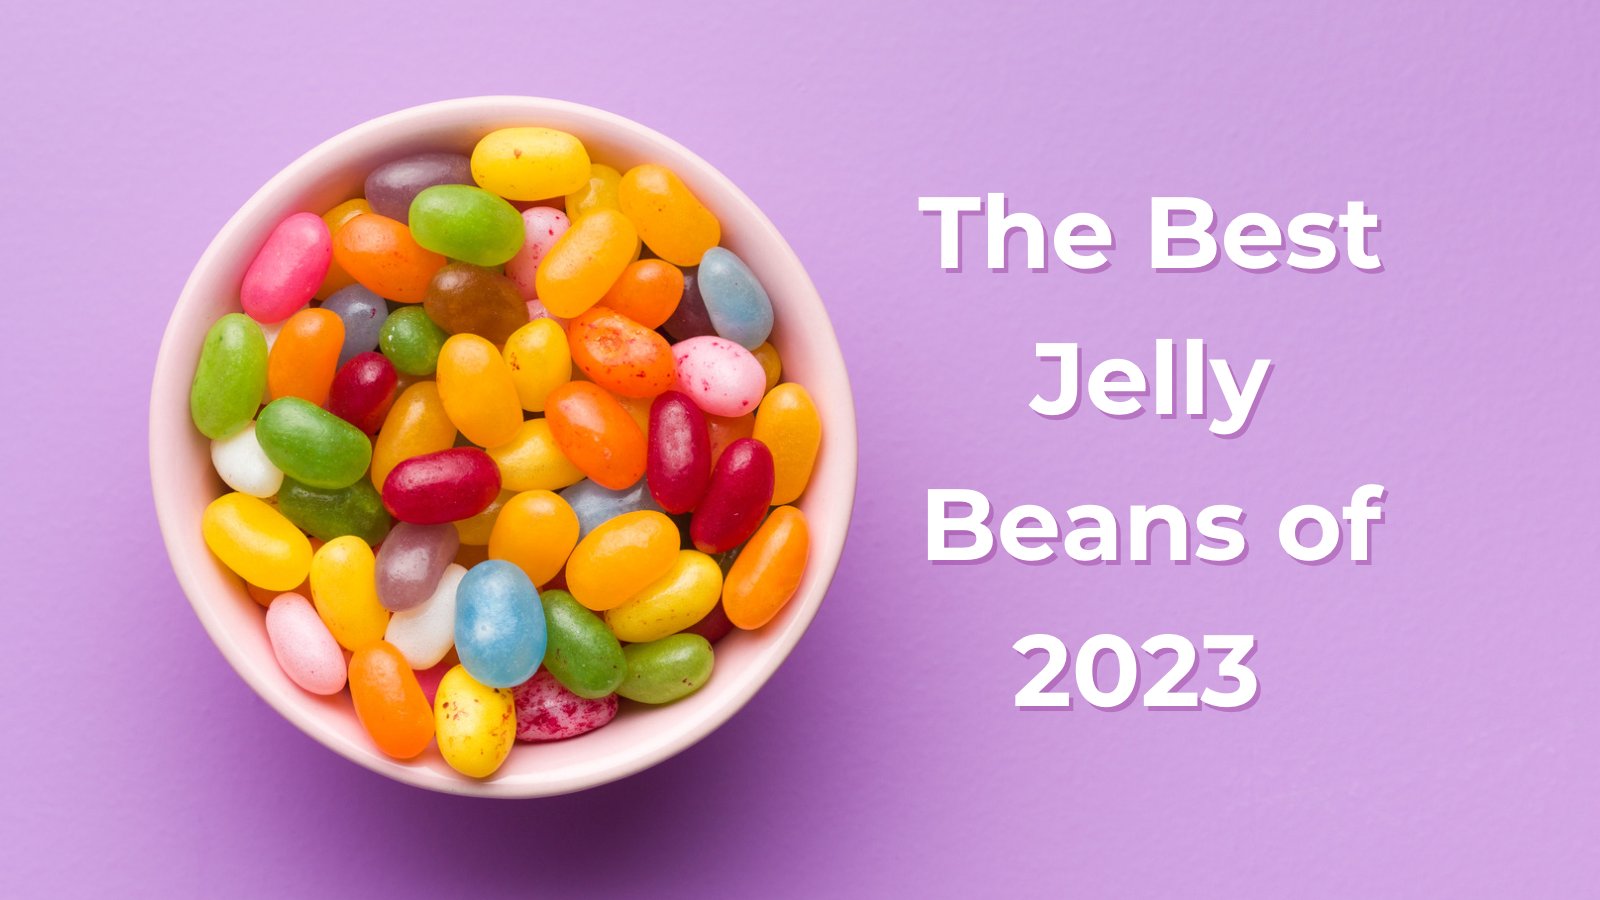 The 8 Best Easter Jelly Beans of 2023